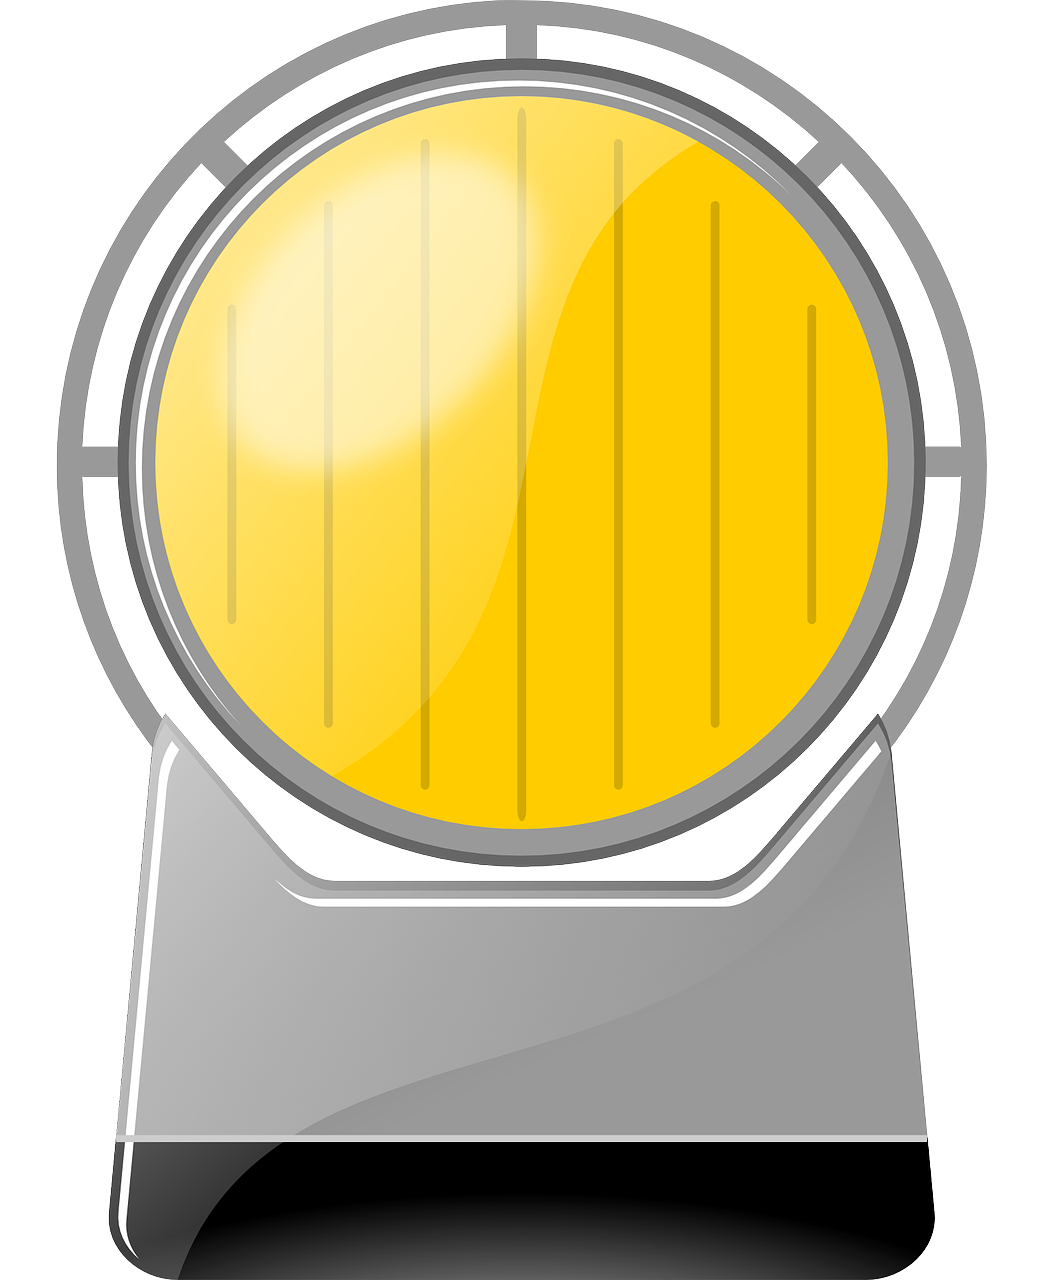 a yellow light sitting on top of a metal base, by Sengai, simple illustration, all enclosed in a circle, highly-detailed illustration, clear view